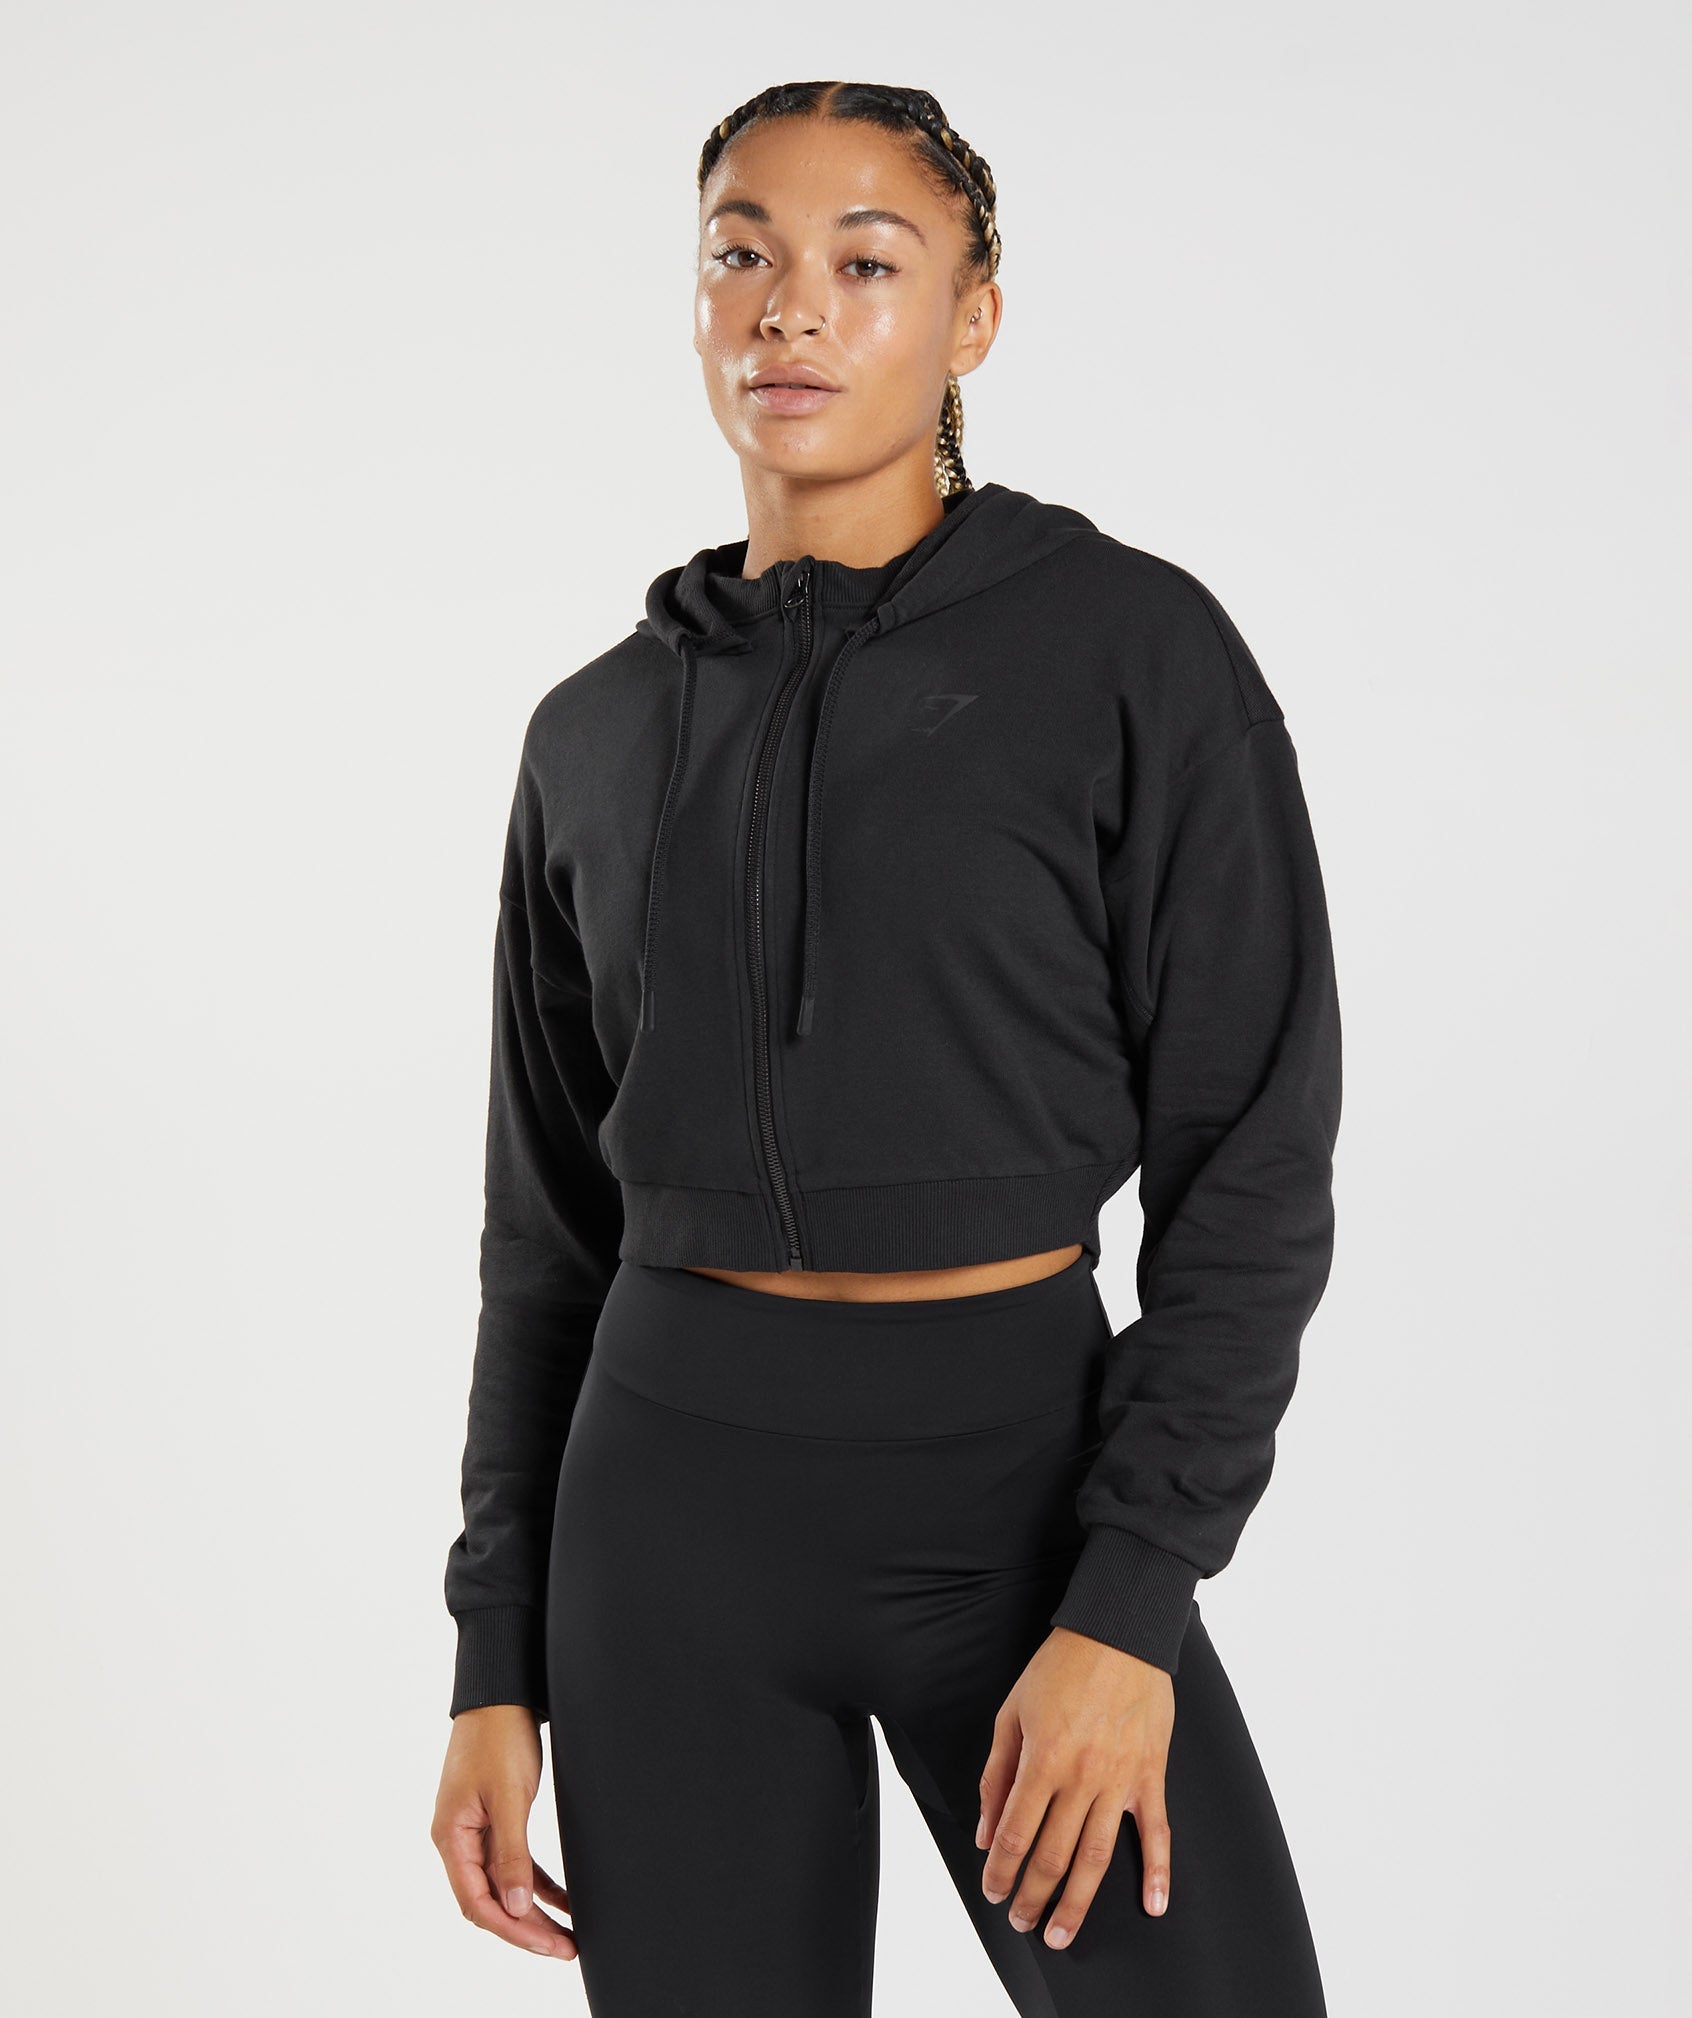 Fshion Gymshark Womens Tracksuit Tenis Rugby Pullover Leggings